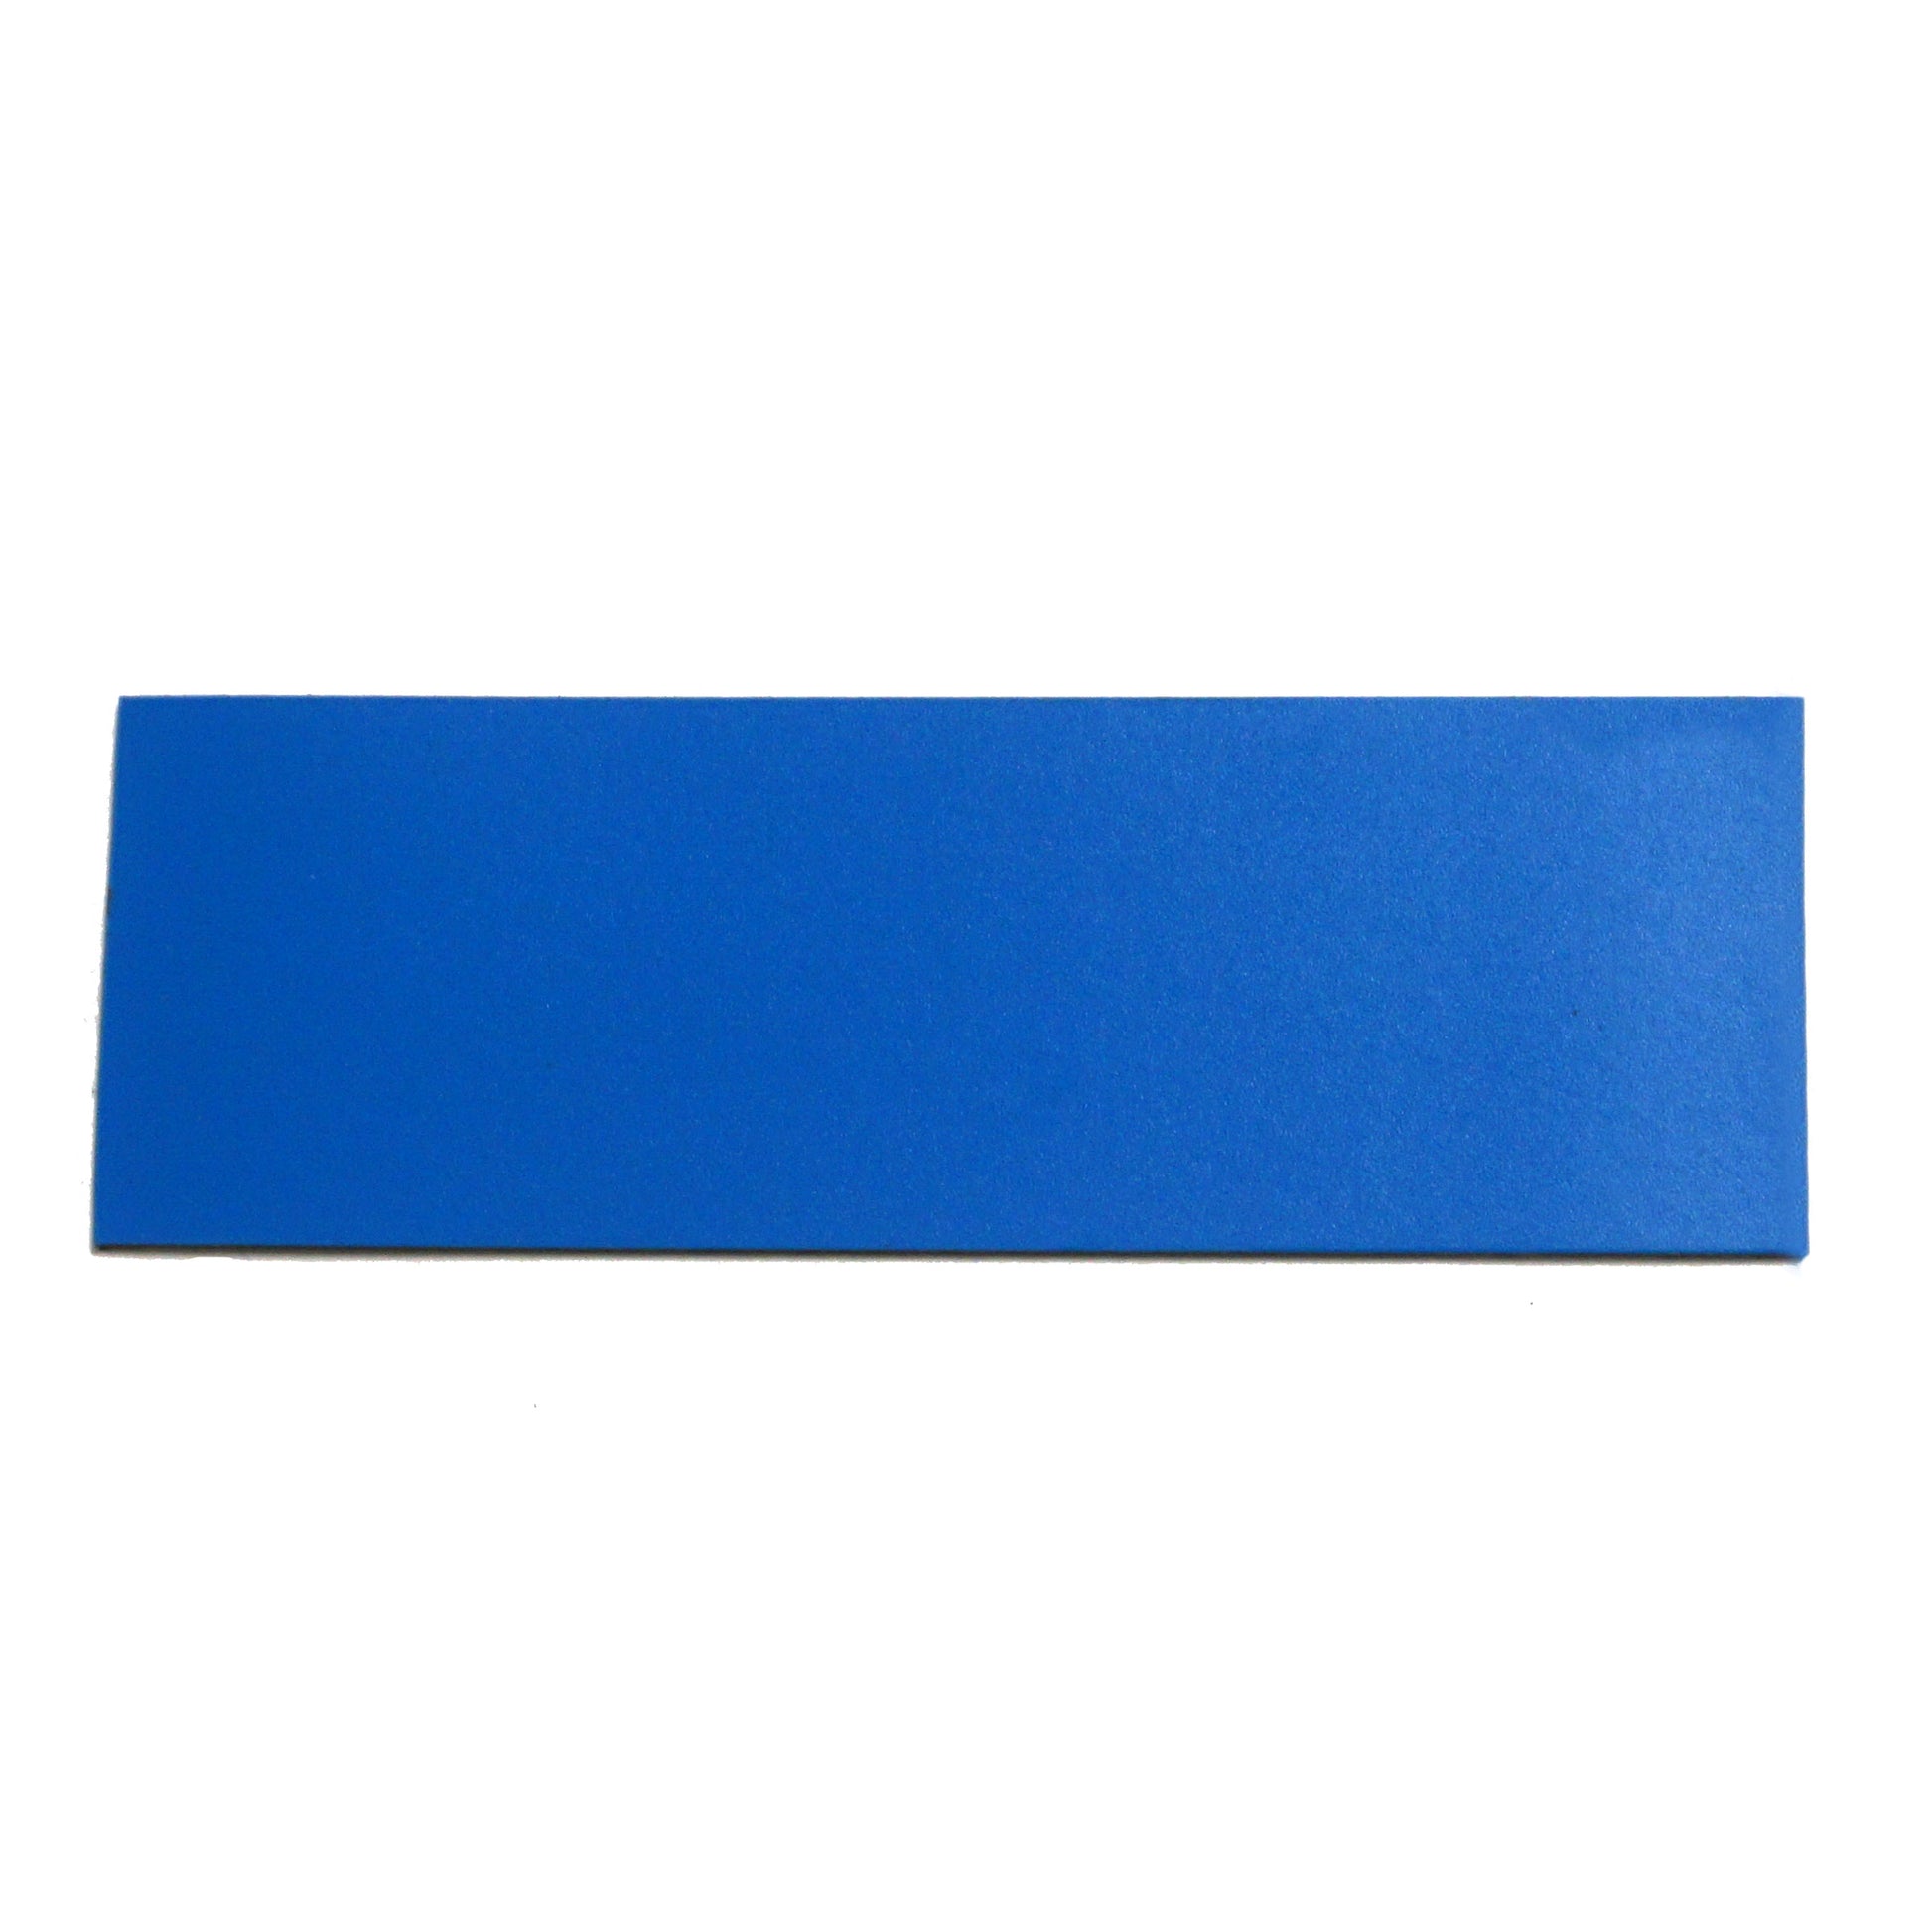 Load image into Gallery viewer, ZGN03040B/WKS50 Magnetic Labeling Strip w/ Blue Vinyl Surface - Top View